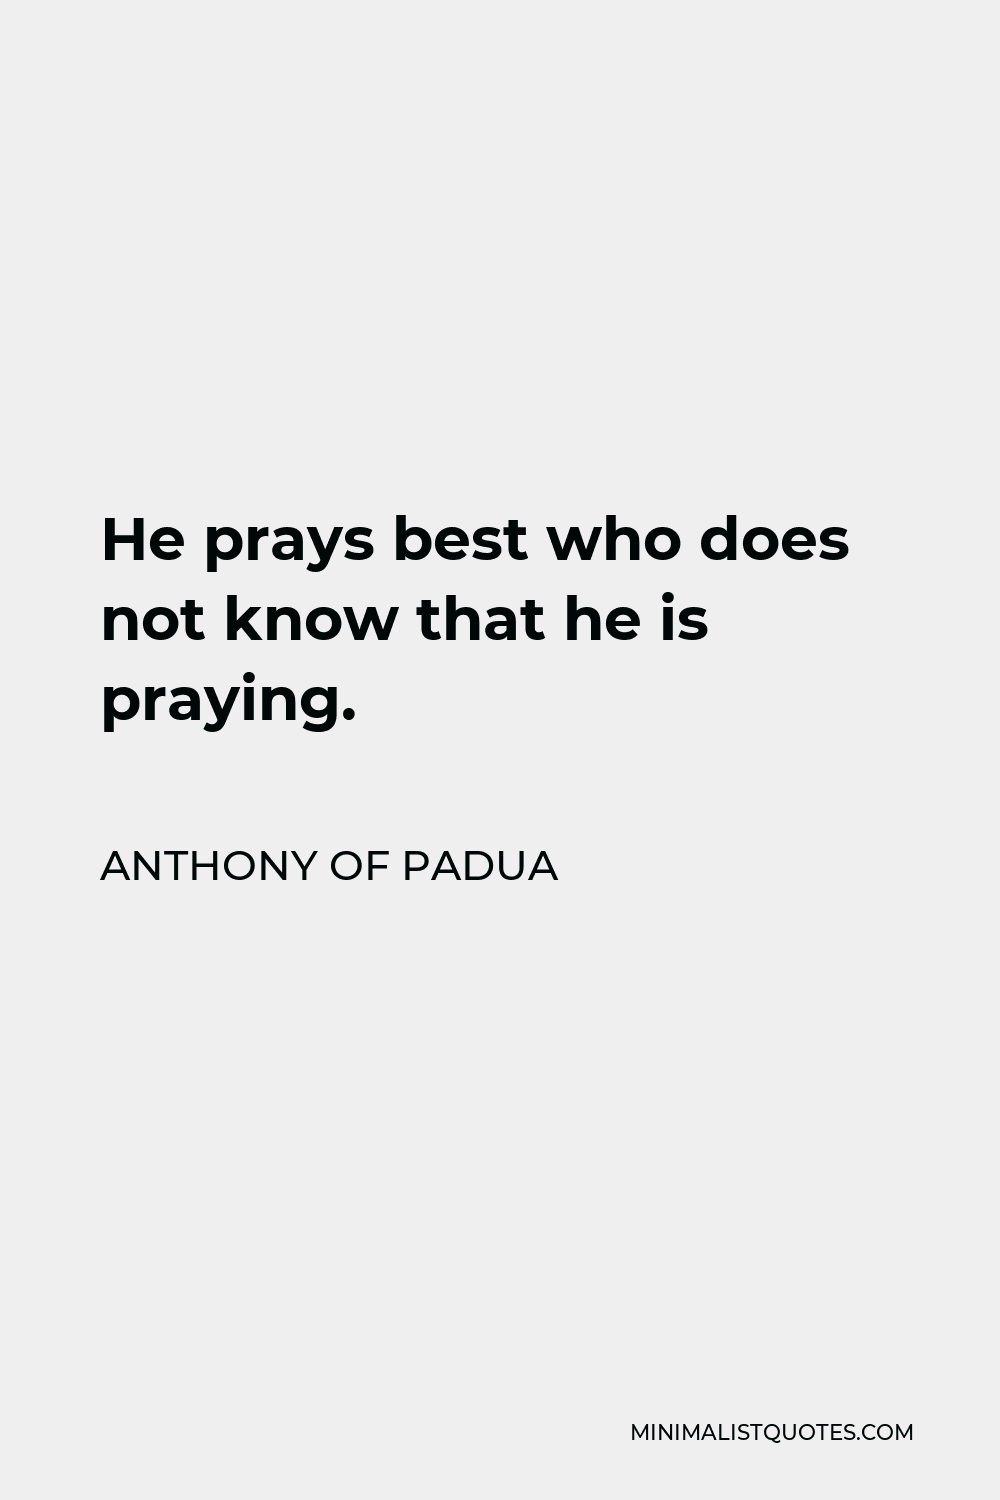 Anthony of Padua Quote - He prays best who does not know that he is praying.